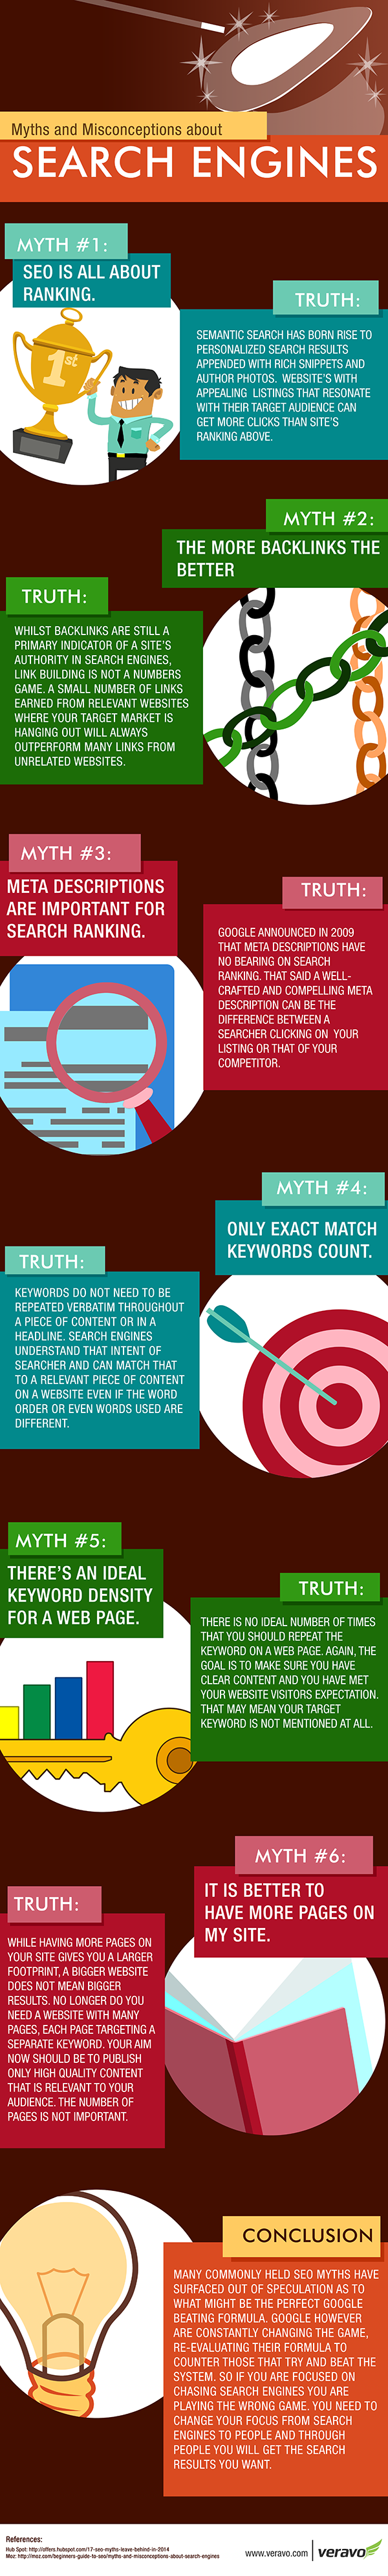 6 Common Myths about Search Engine Optimization